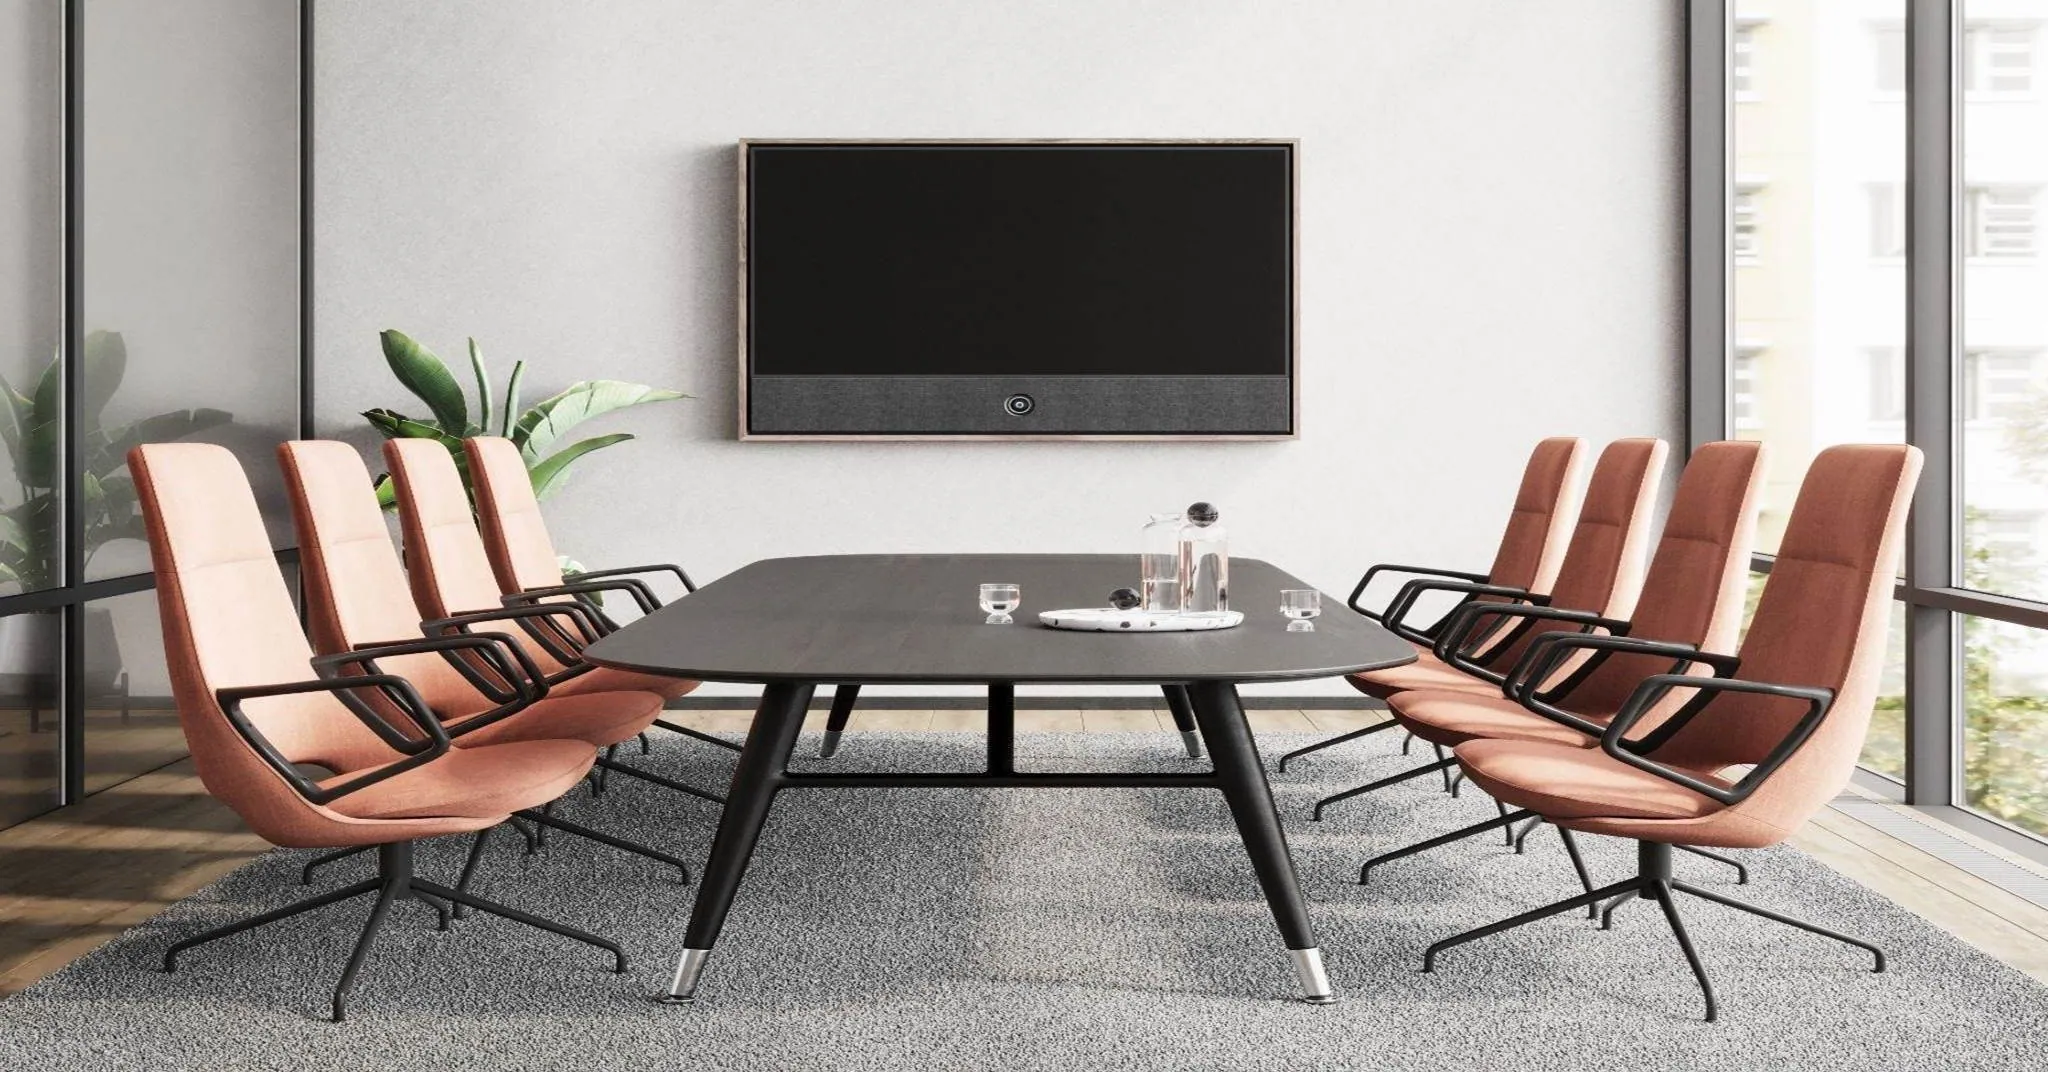 Beautify the Collaborative Workplace with Hidden Technology